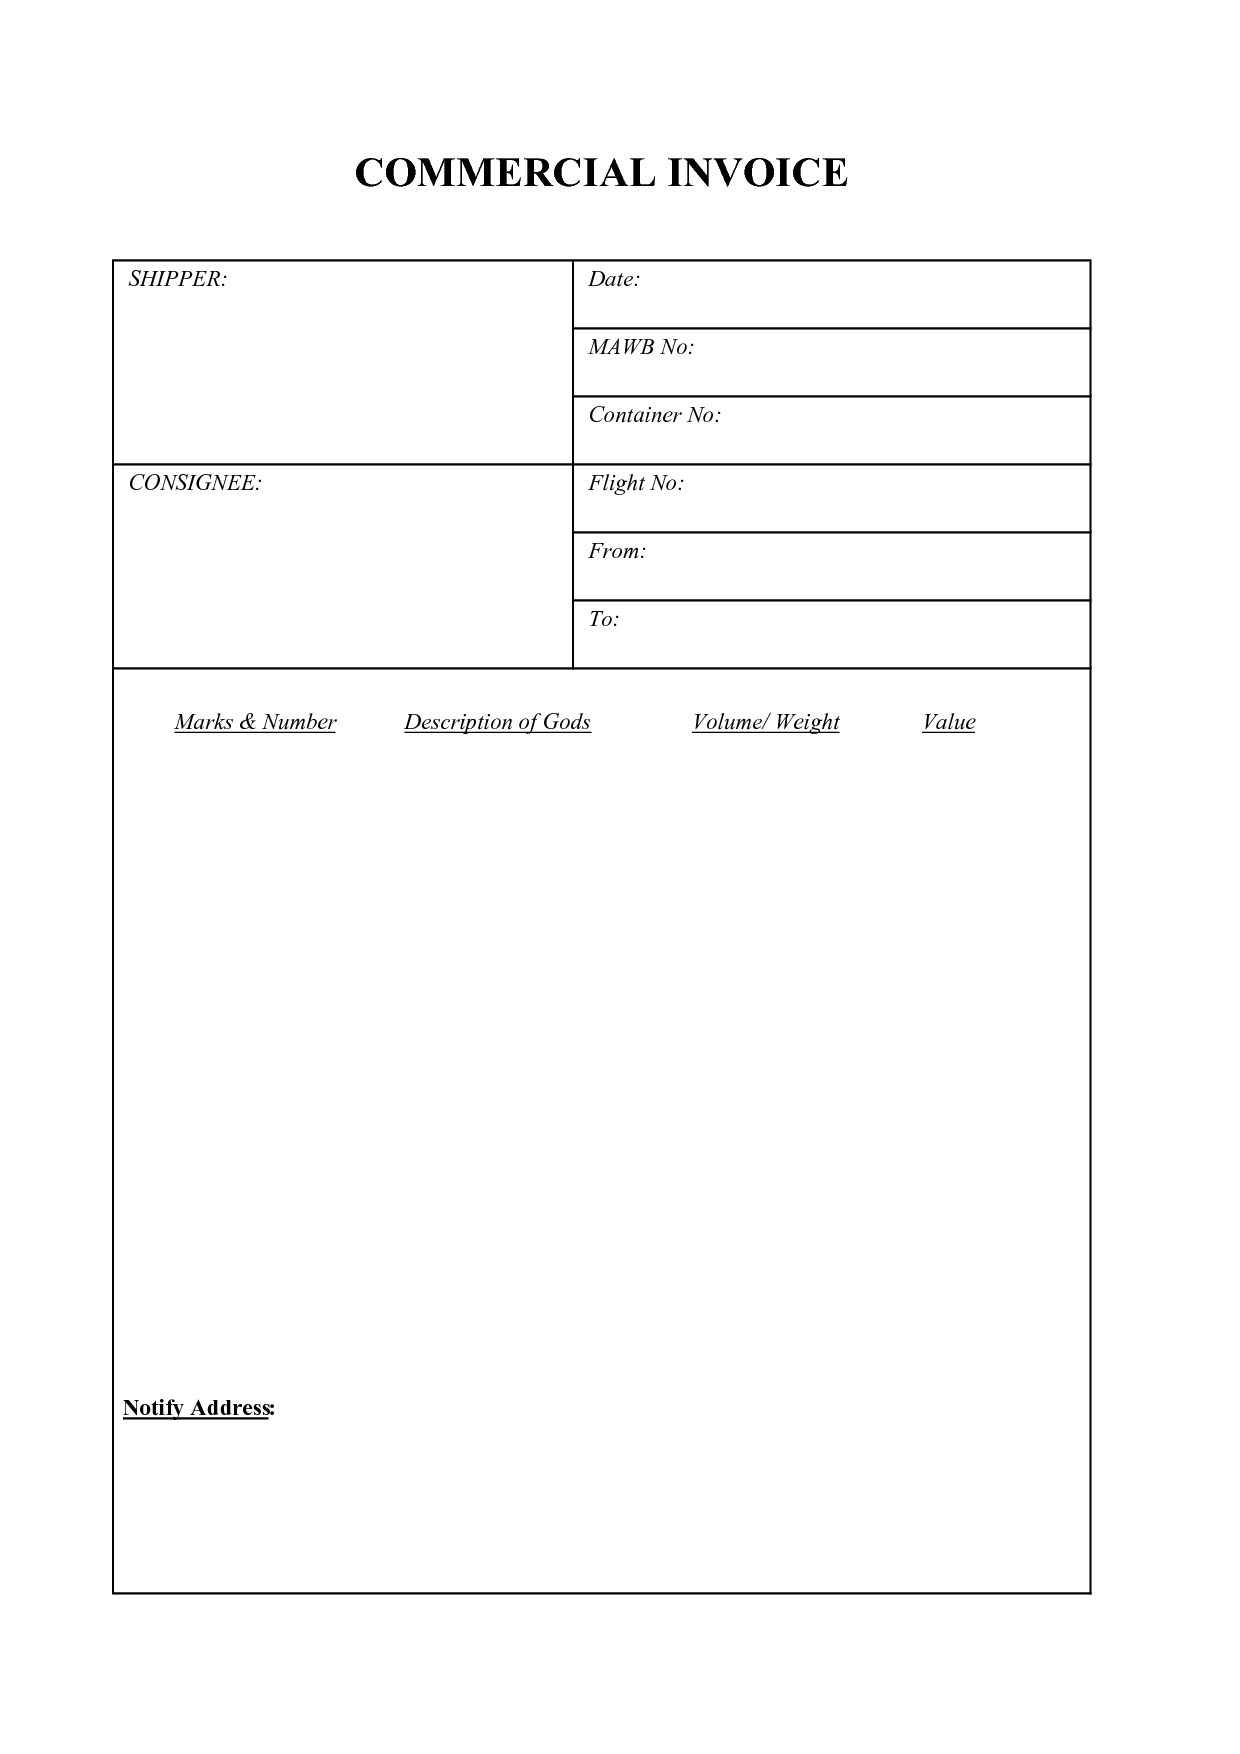 tnt commercial invoice template uk 2017 with regard to word mdxar tnt proforma invoice